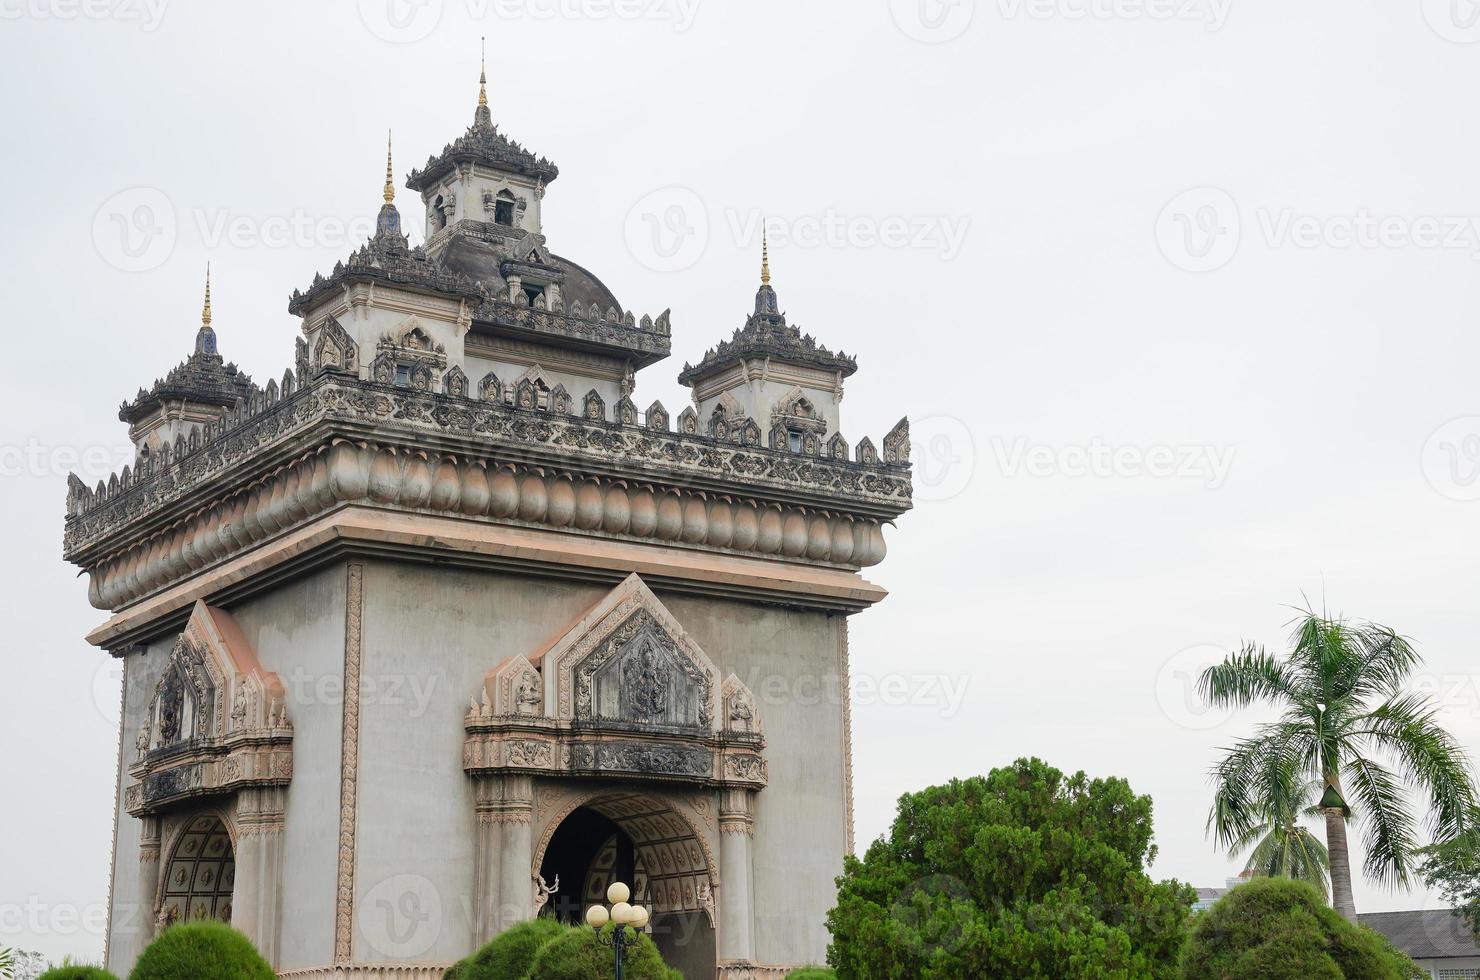 Patuxai Victory Monument or Victory Gate Landmark of Vientiane City of Laos photo